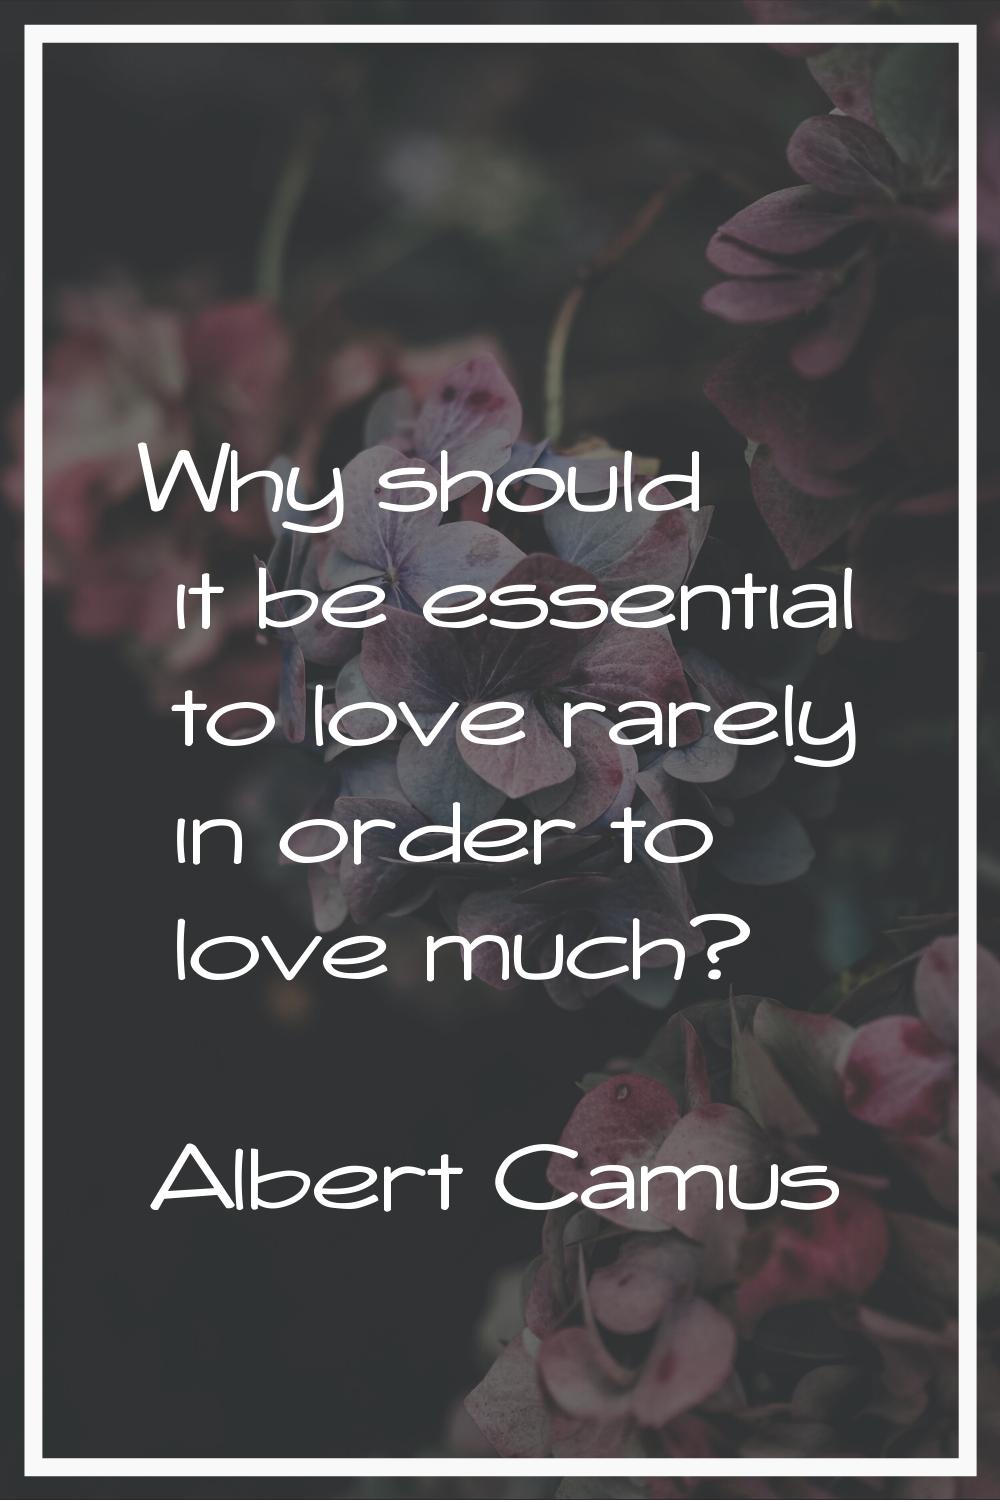 Why should it be essential to love rarely in order to love much?